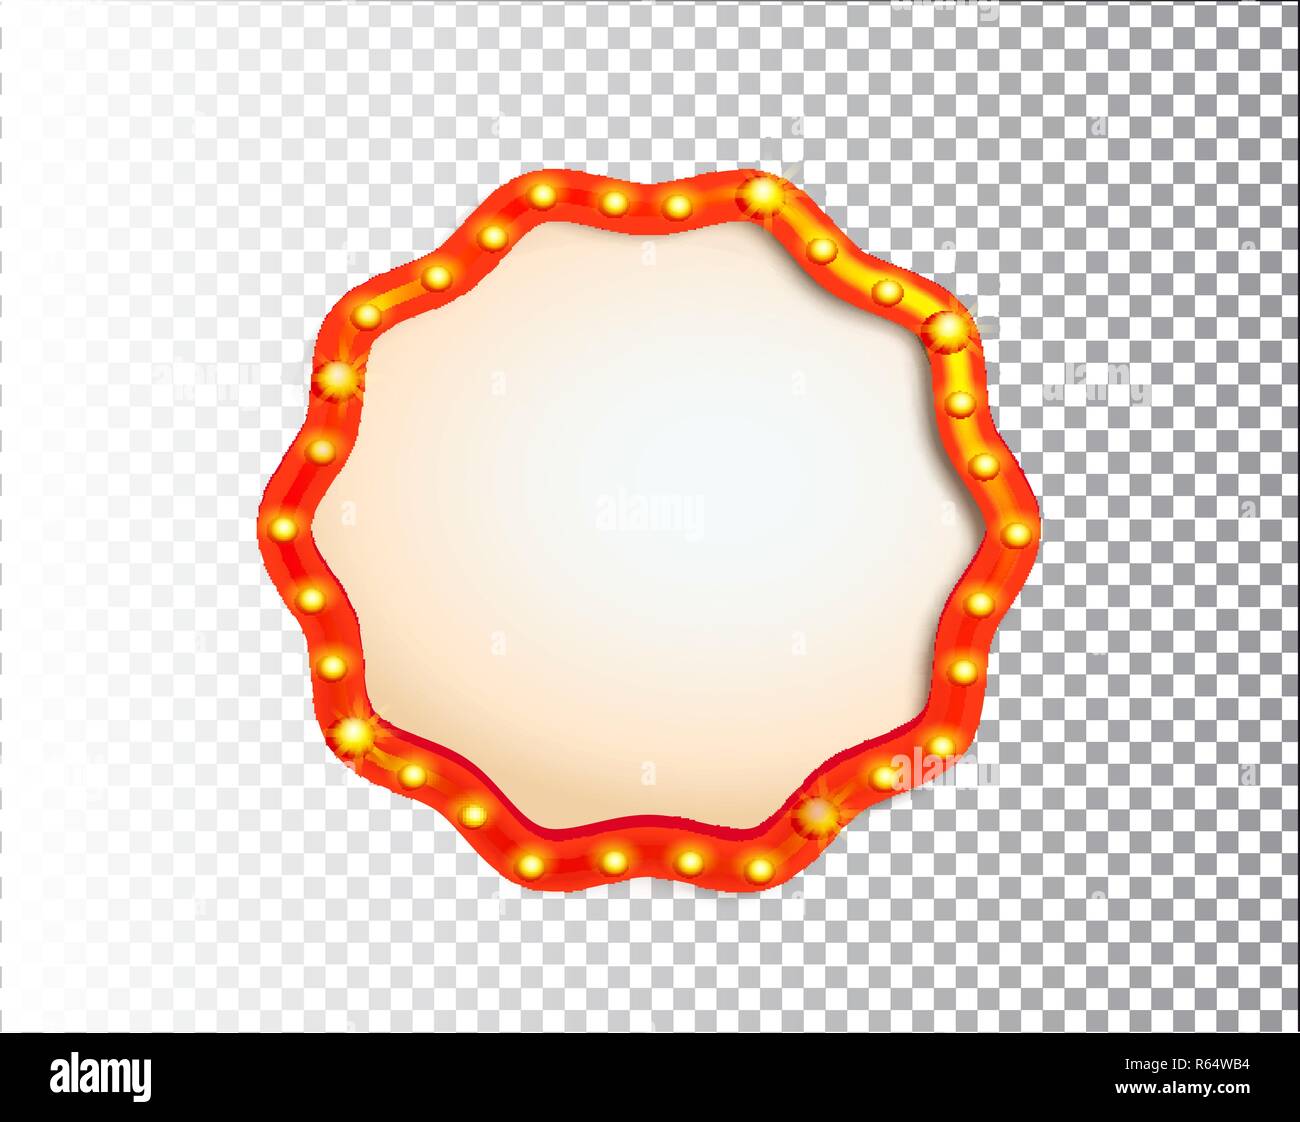 Shining isolated retro bulb light circle frame on transparent background. Vintage style banner, sign, signboard. Perfect template for shows, casino, c Stock Vector